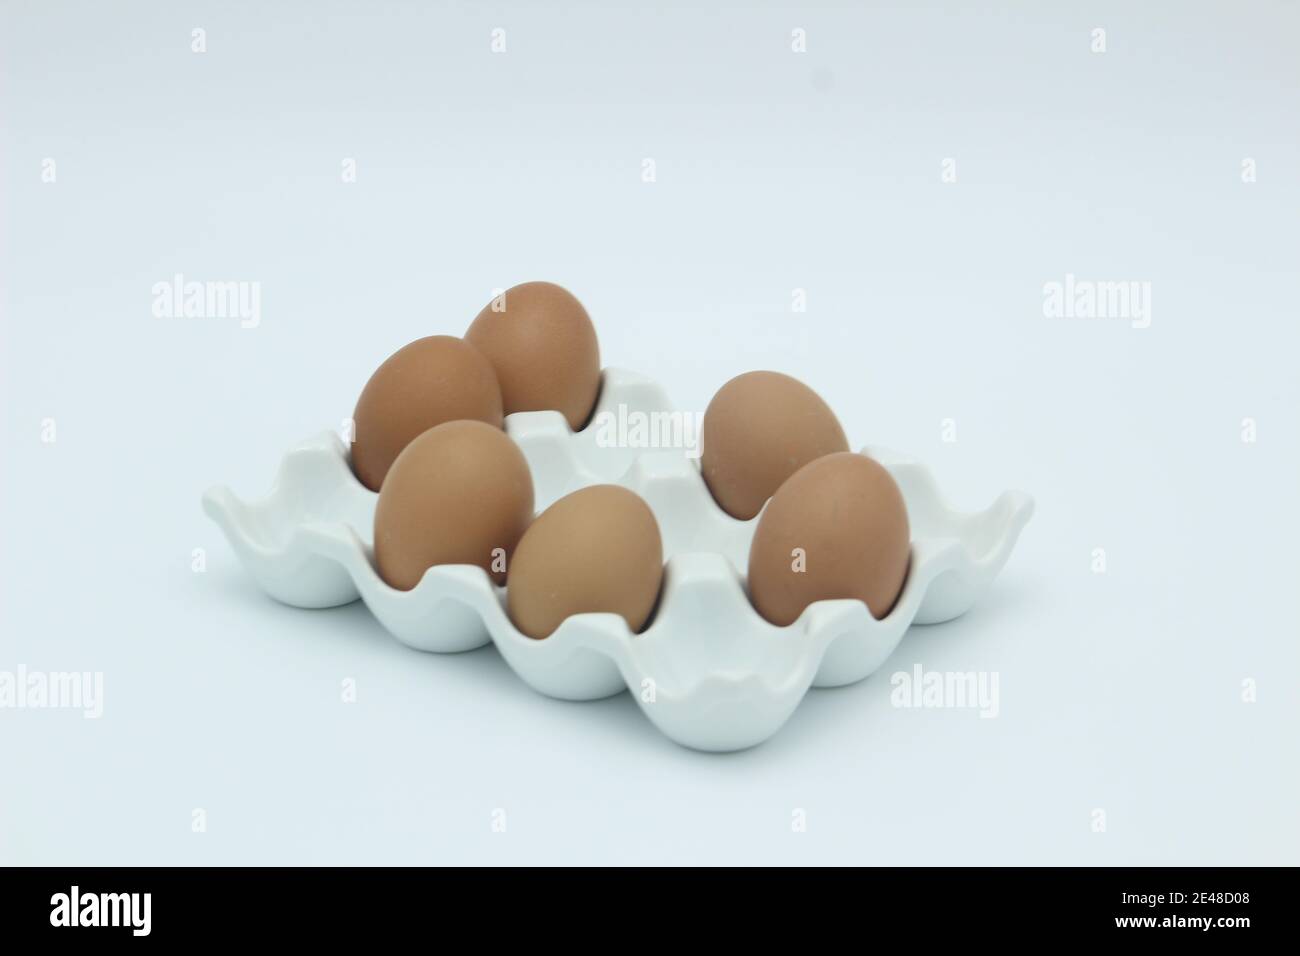 Six brown eggs in an egg rack against a white background Stock Photo